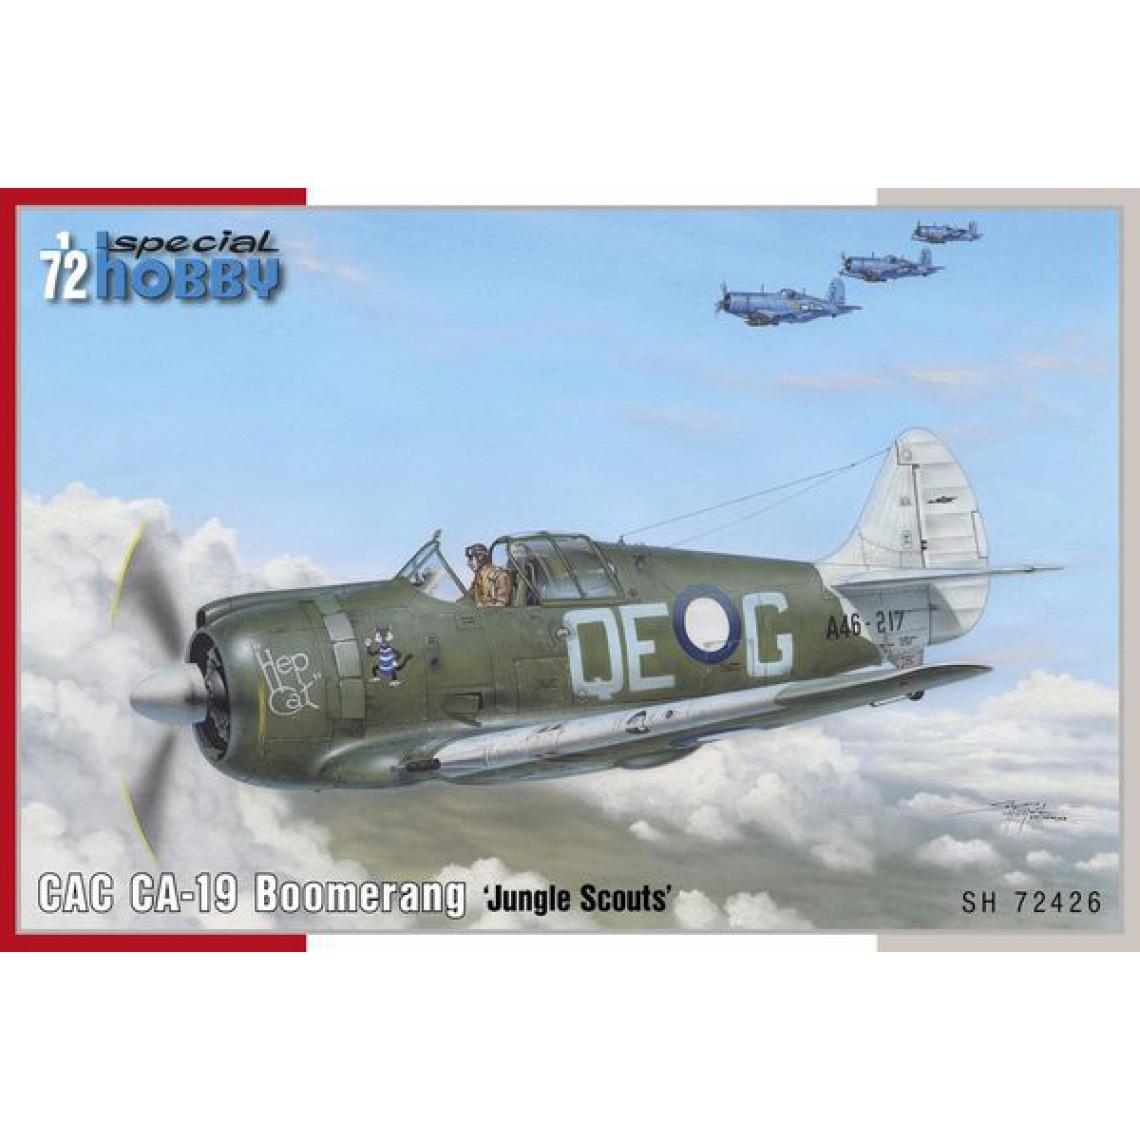 Special Hobby - CAC CA-19 Boomerang "Jungle Scouts - 1:72e - Special Hobby - Accessoires et pièces